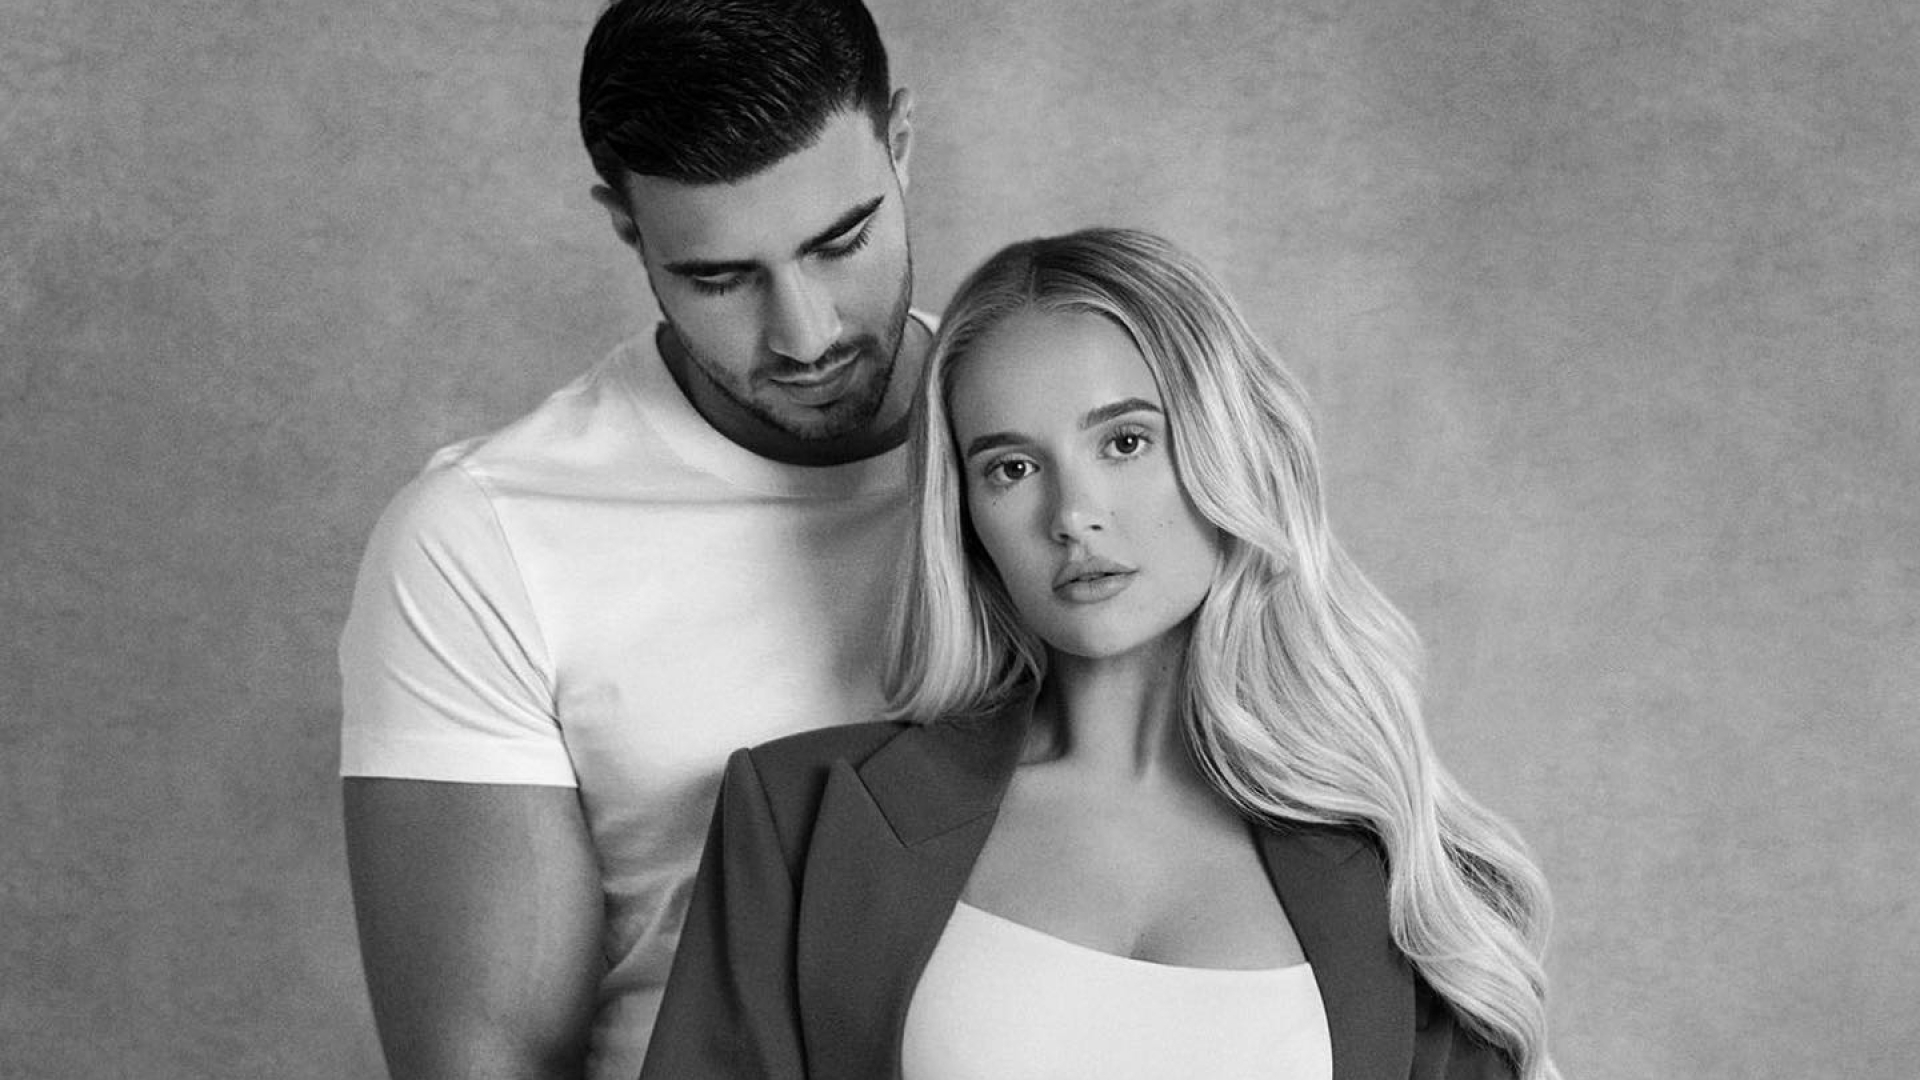 Molly-Mae Hague and Tommy Fury pose with baby bump in a romantic photo shoot